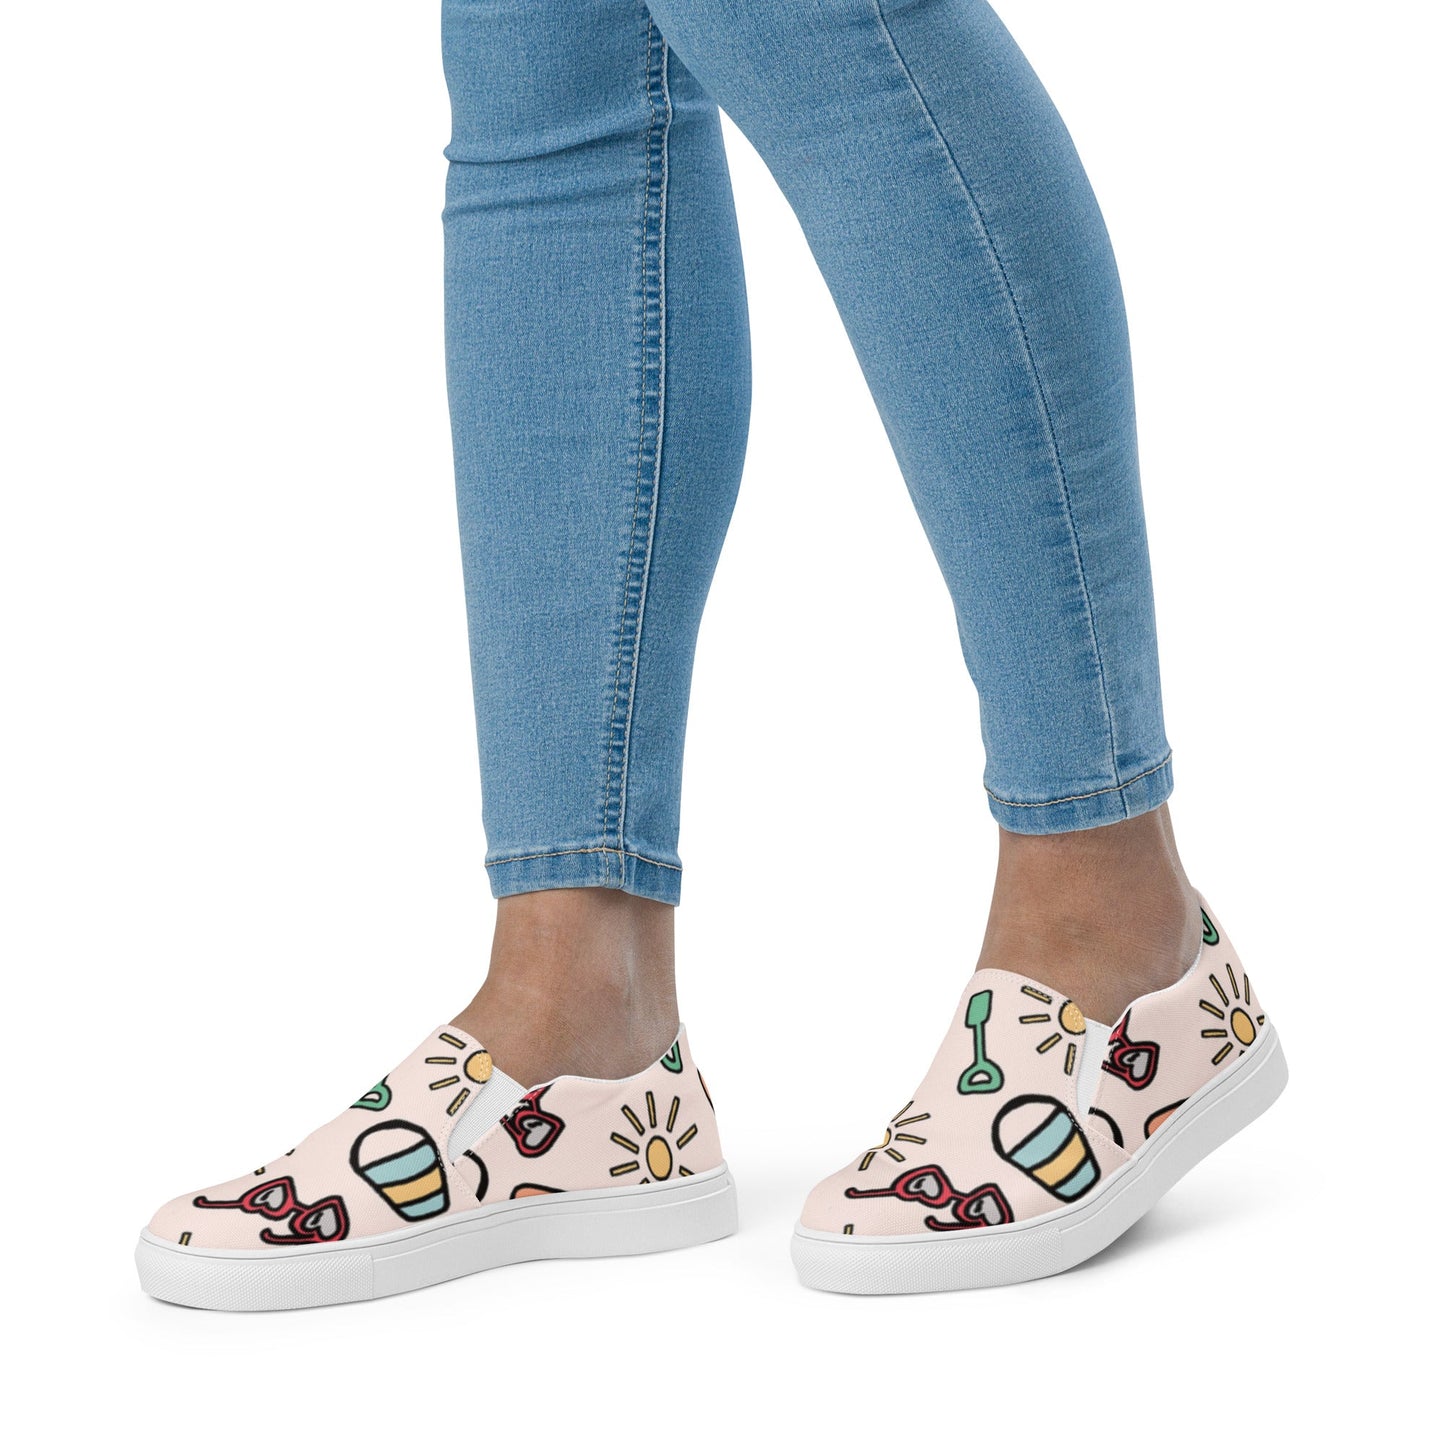 Sunny Day | Women’s Slip-on Canvas Shoes - Bonotee